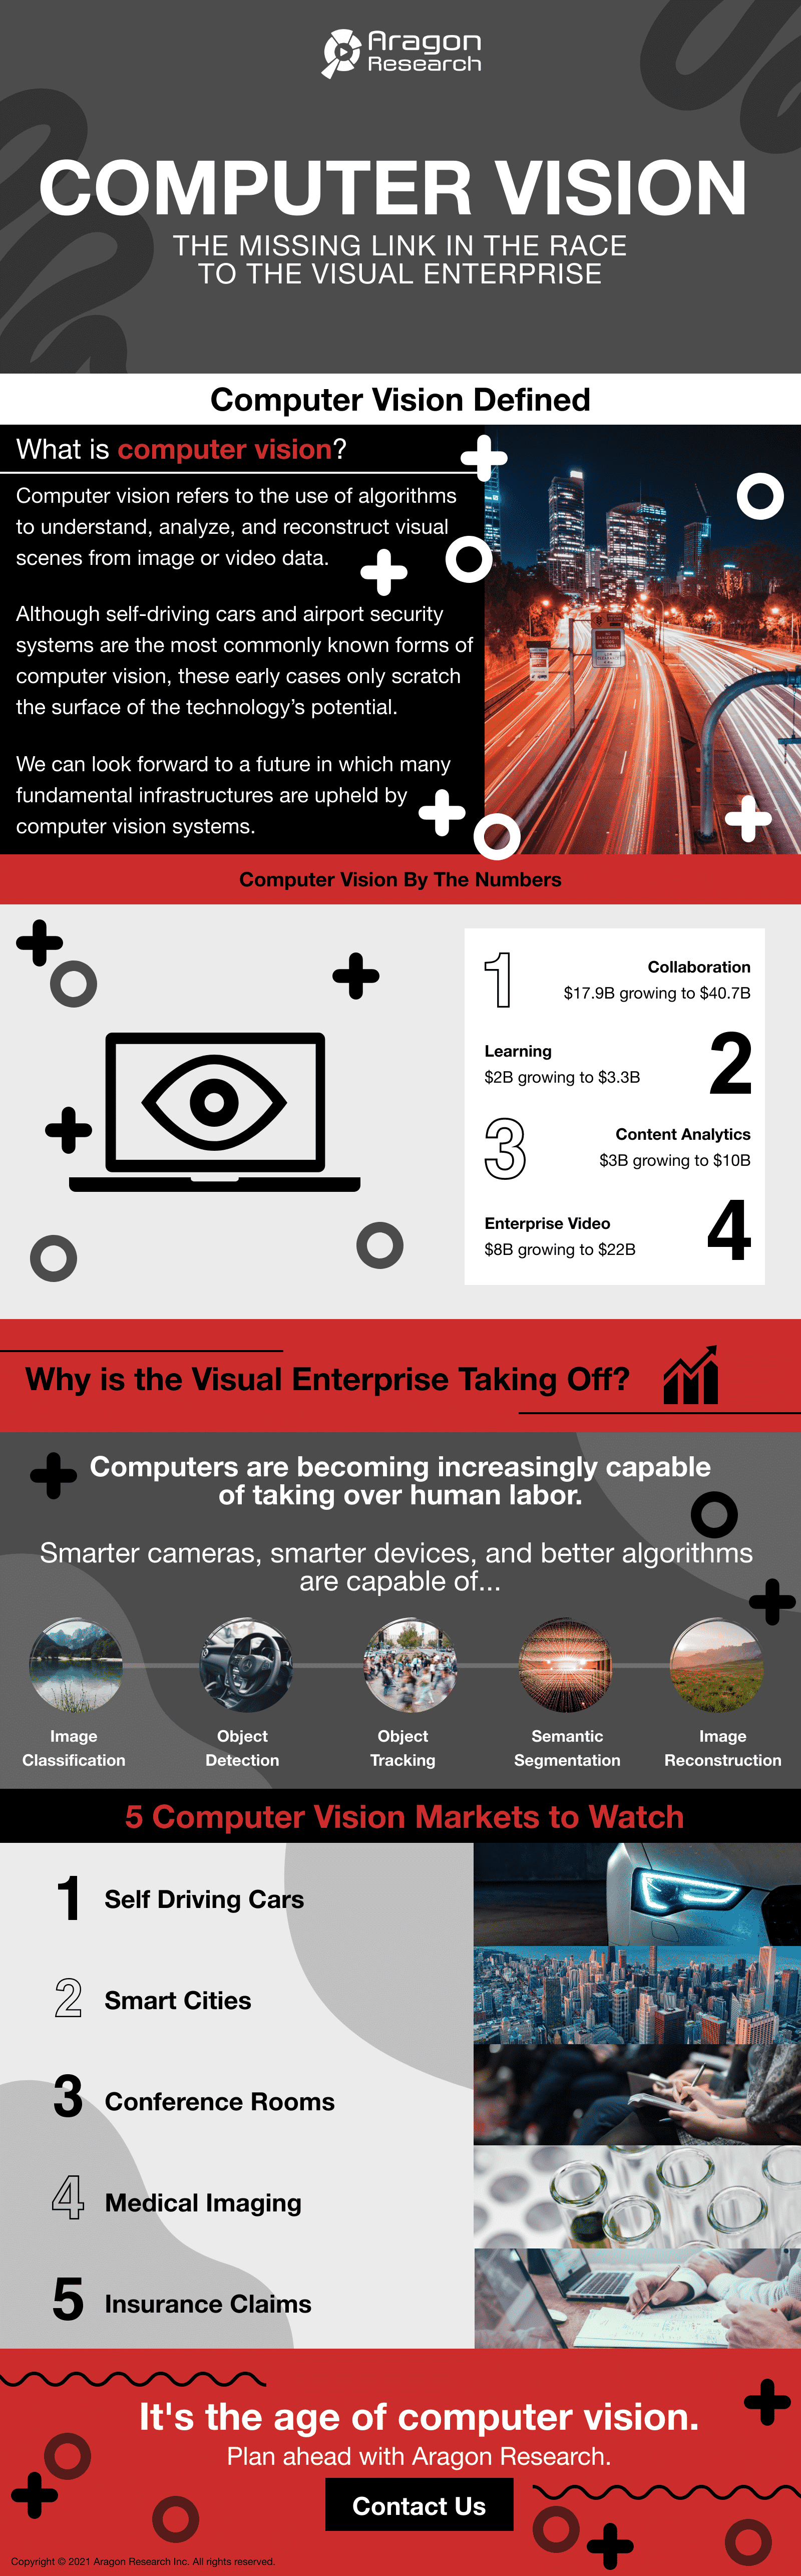 computer vision 55080791 - Computer Vision: The Missing Link in the Race to the Visual Enterprise